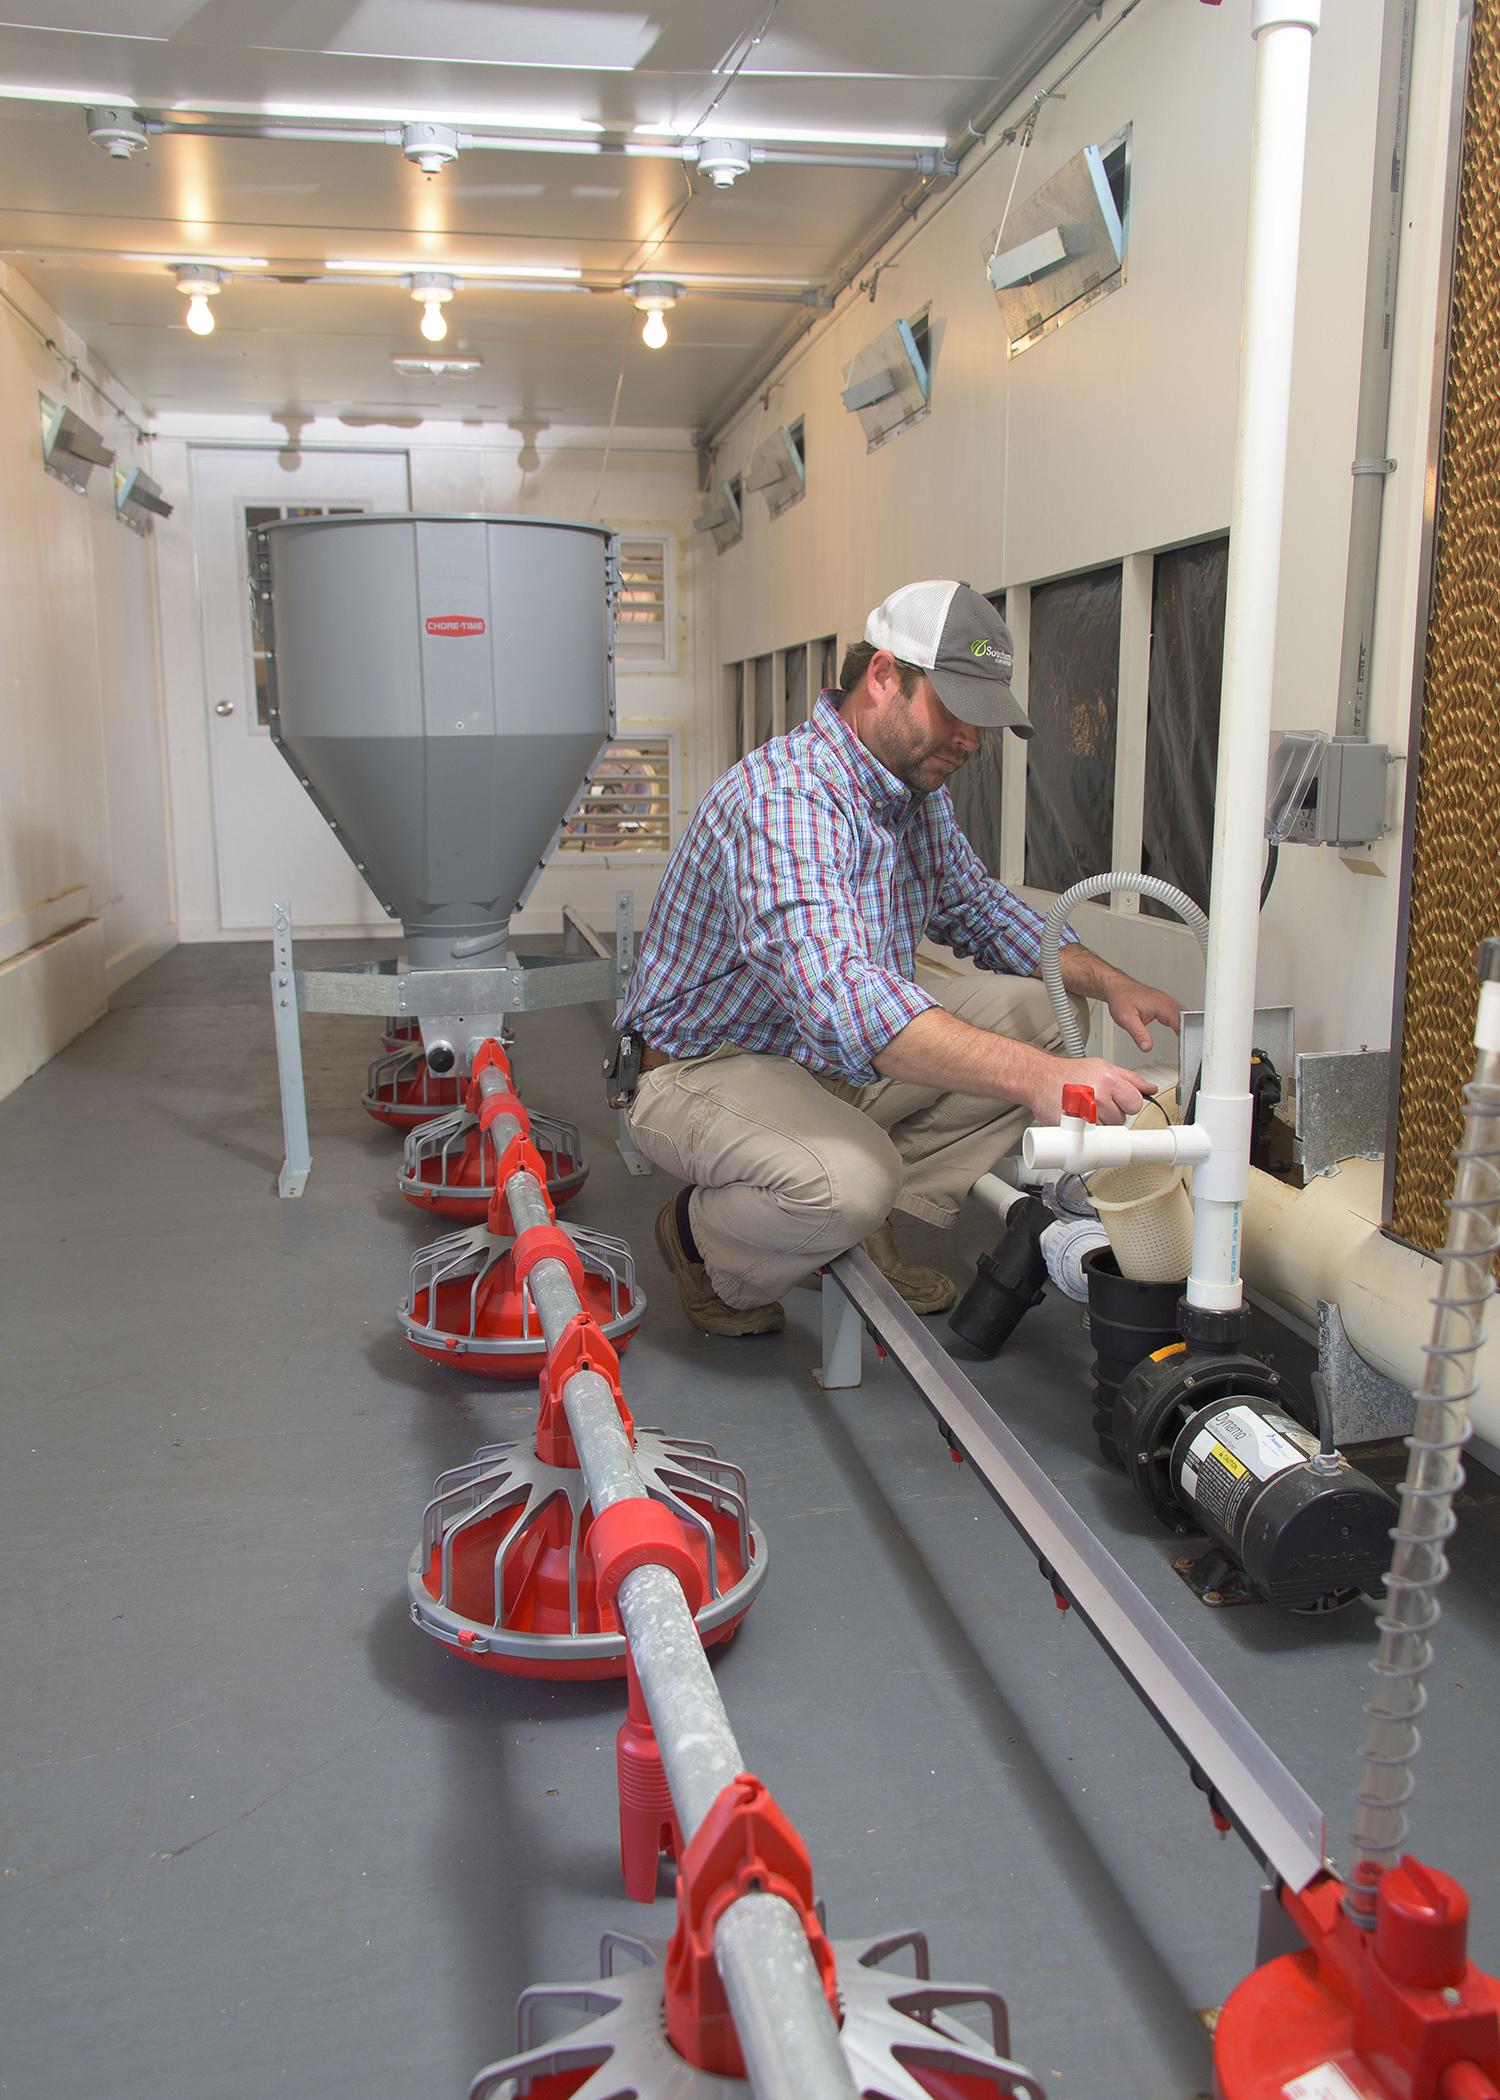 Mississippi State University research associate Daniel Chesser tests a new pumping unit inside the Mobile Environmental and Energy Lab at Mississippi State University Oct. 29, 2015. (Photo by MSU Extension/Kevin Hudson)